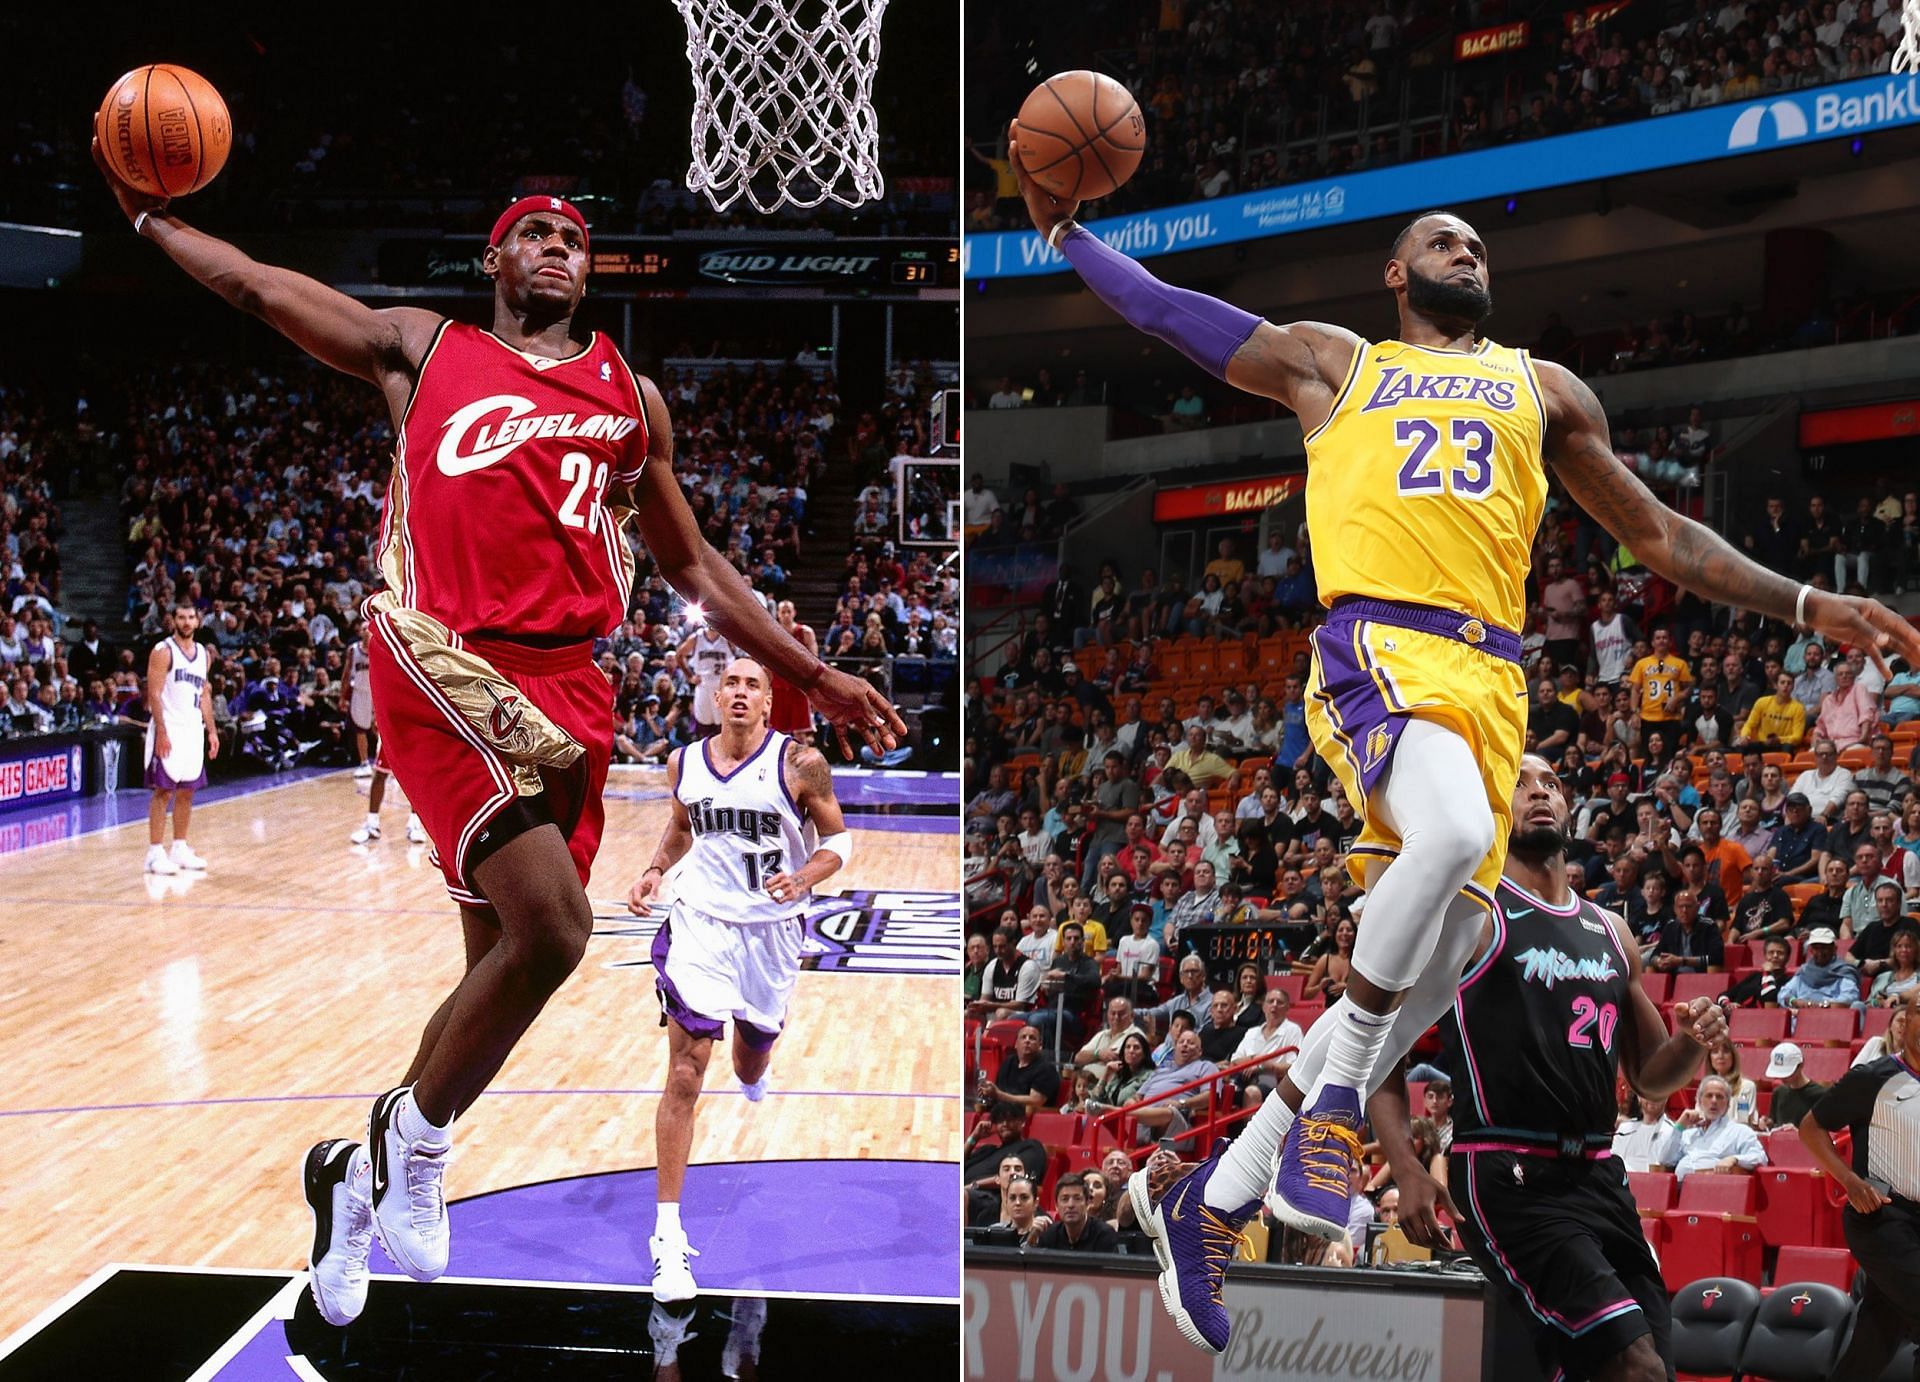 LeBron James, the Young King, was already a fearsome force when he jumped from high school to the NBA. 